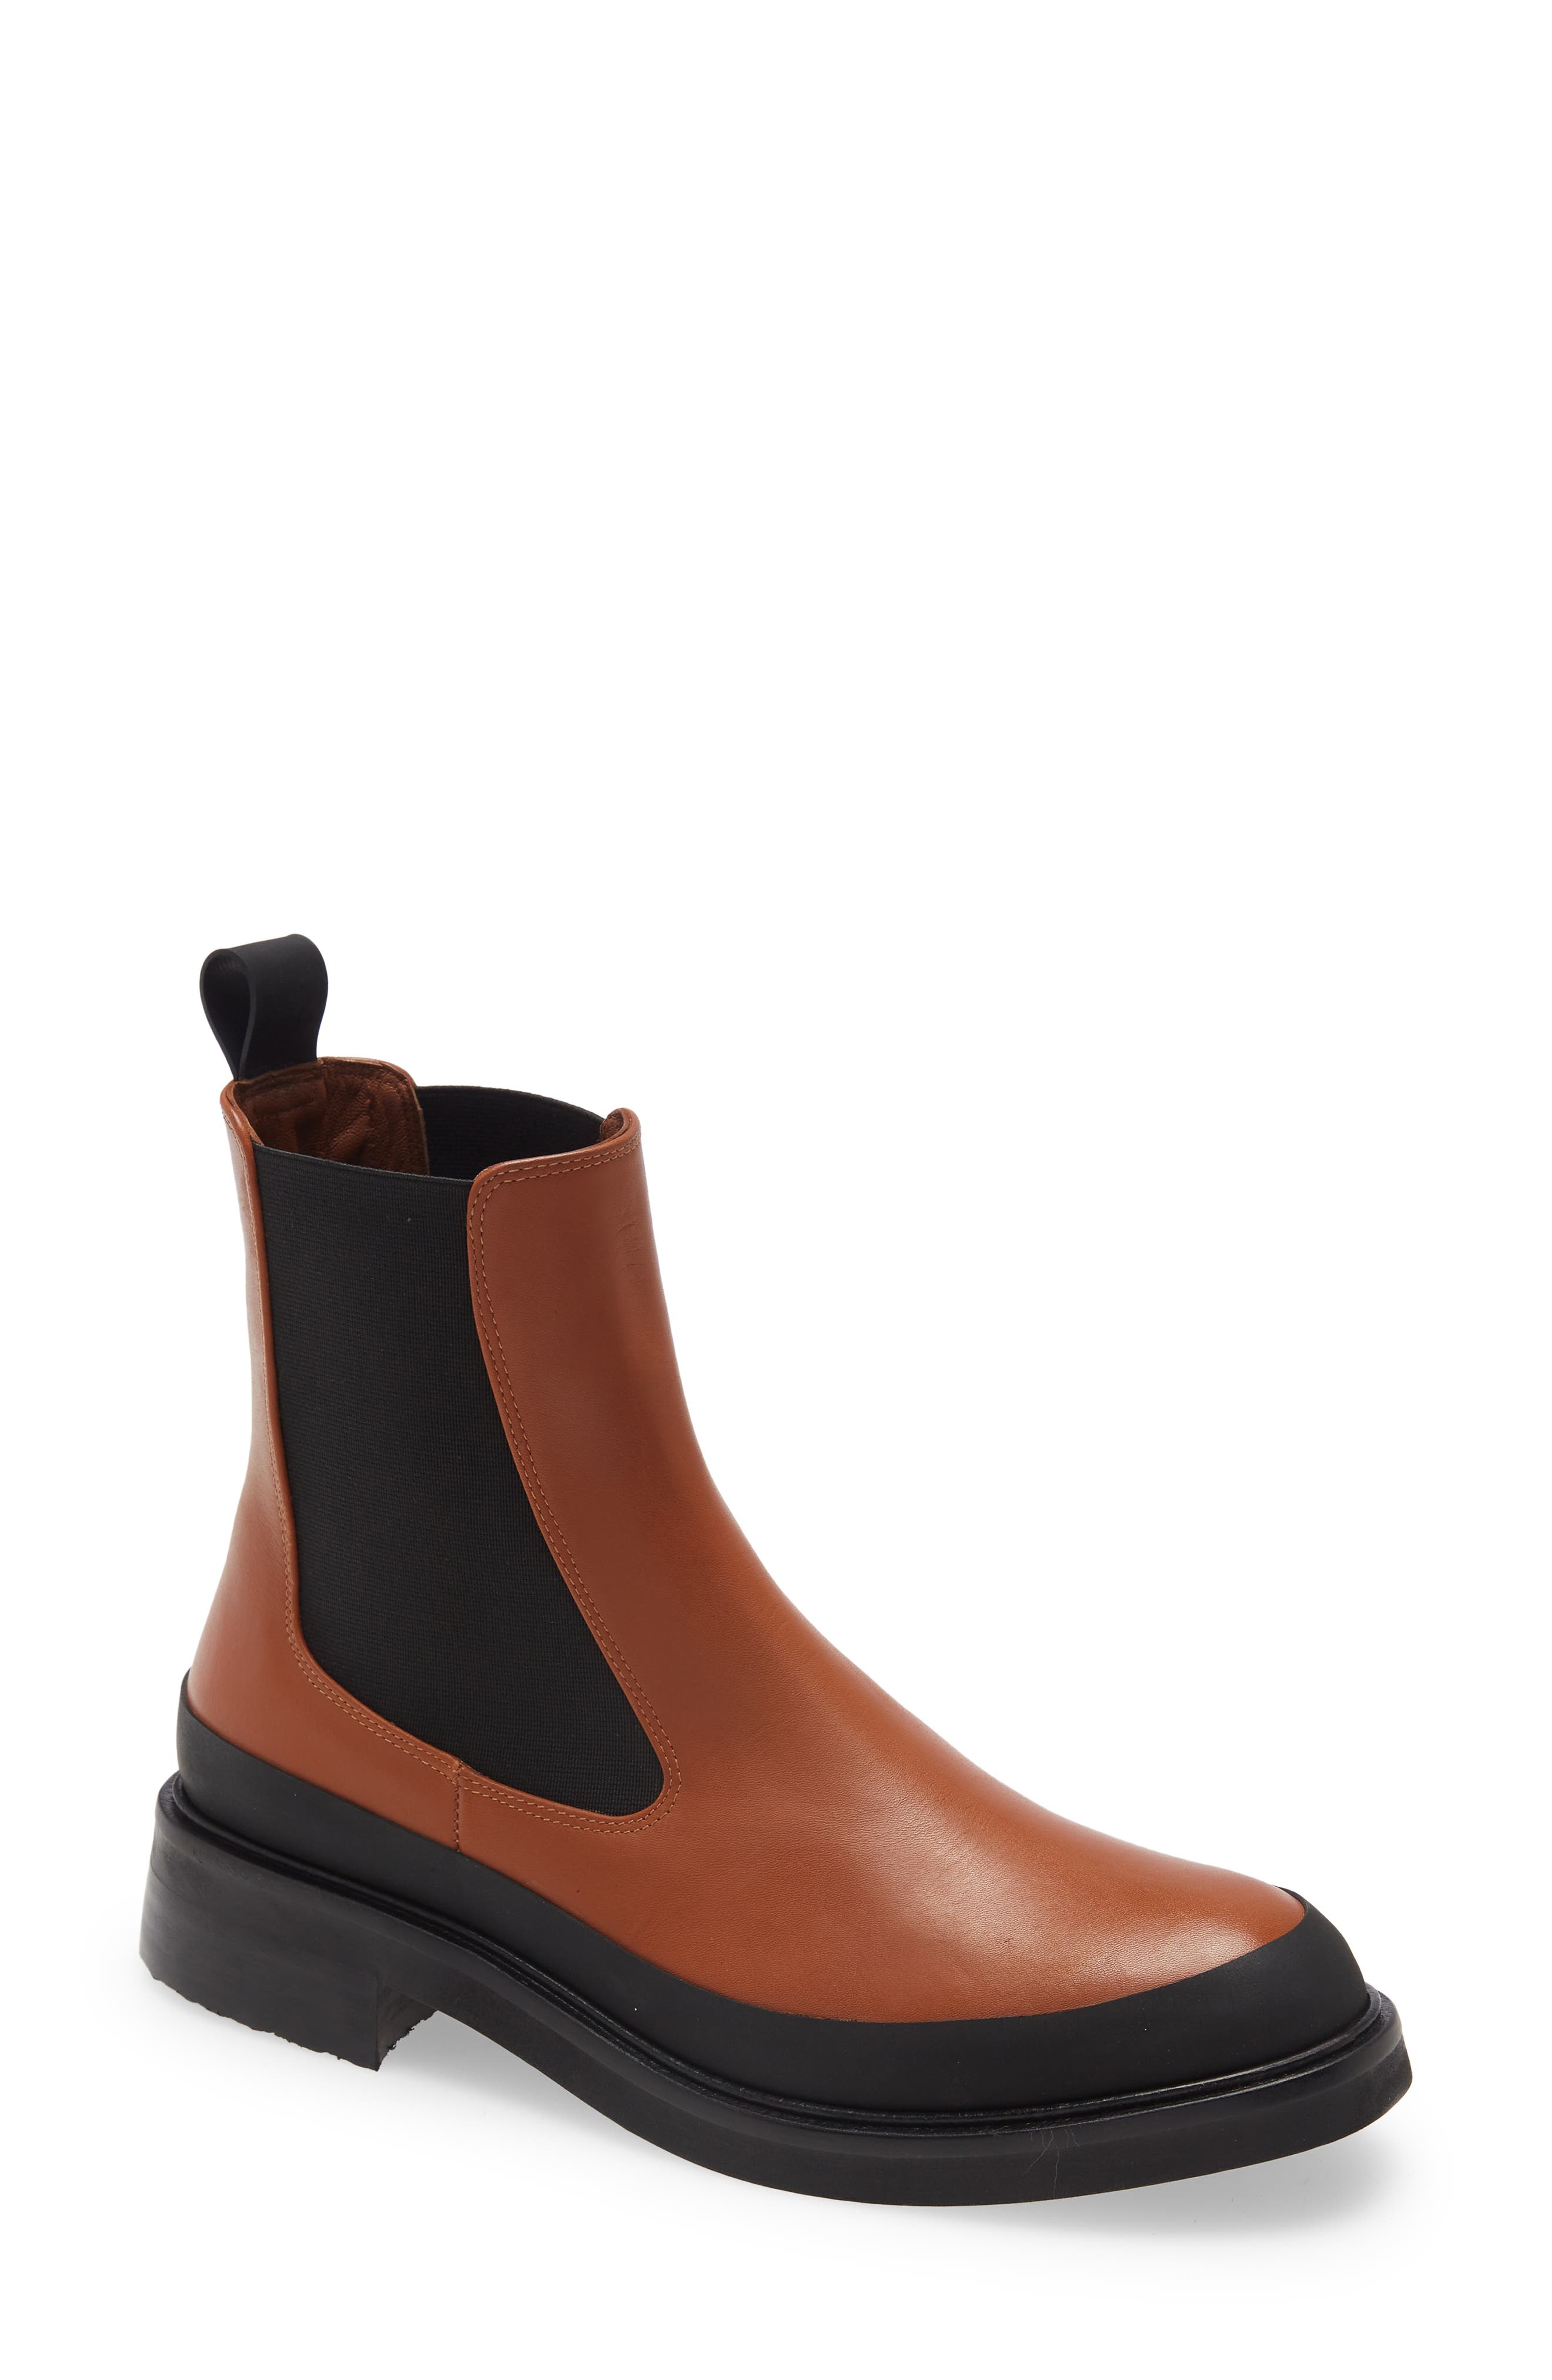 FRAME Le Holland Chelsea Boot in Tobacco at Nordstrom, Size 8.5Us